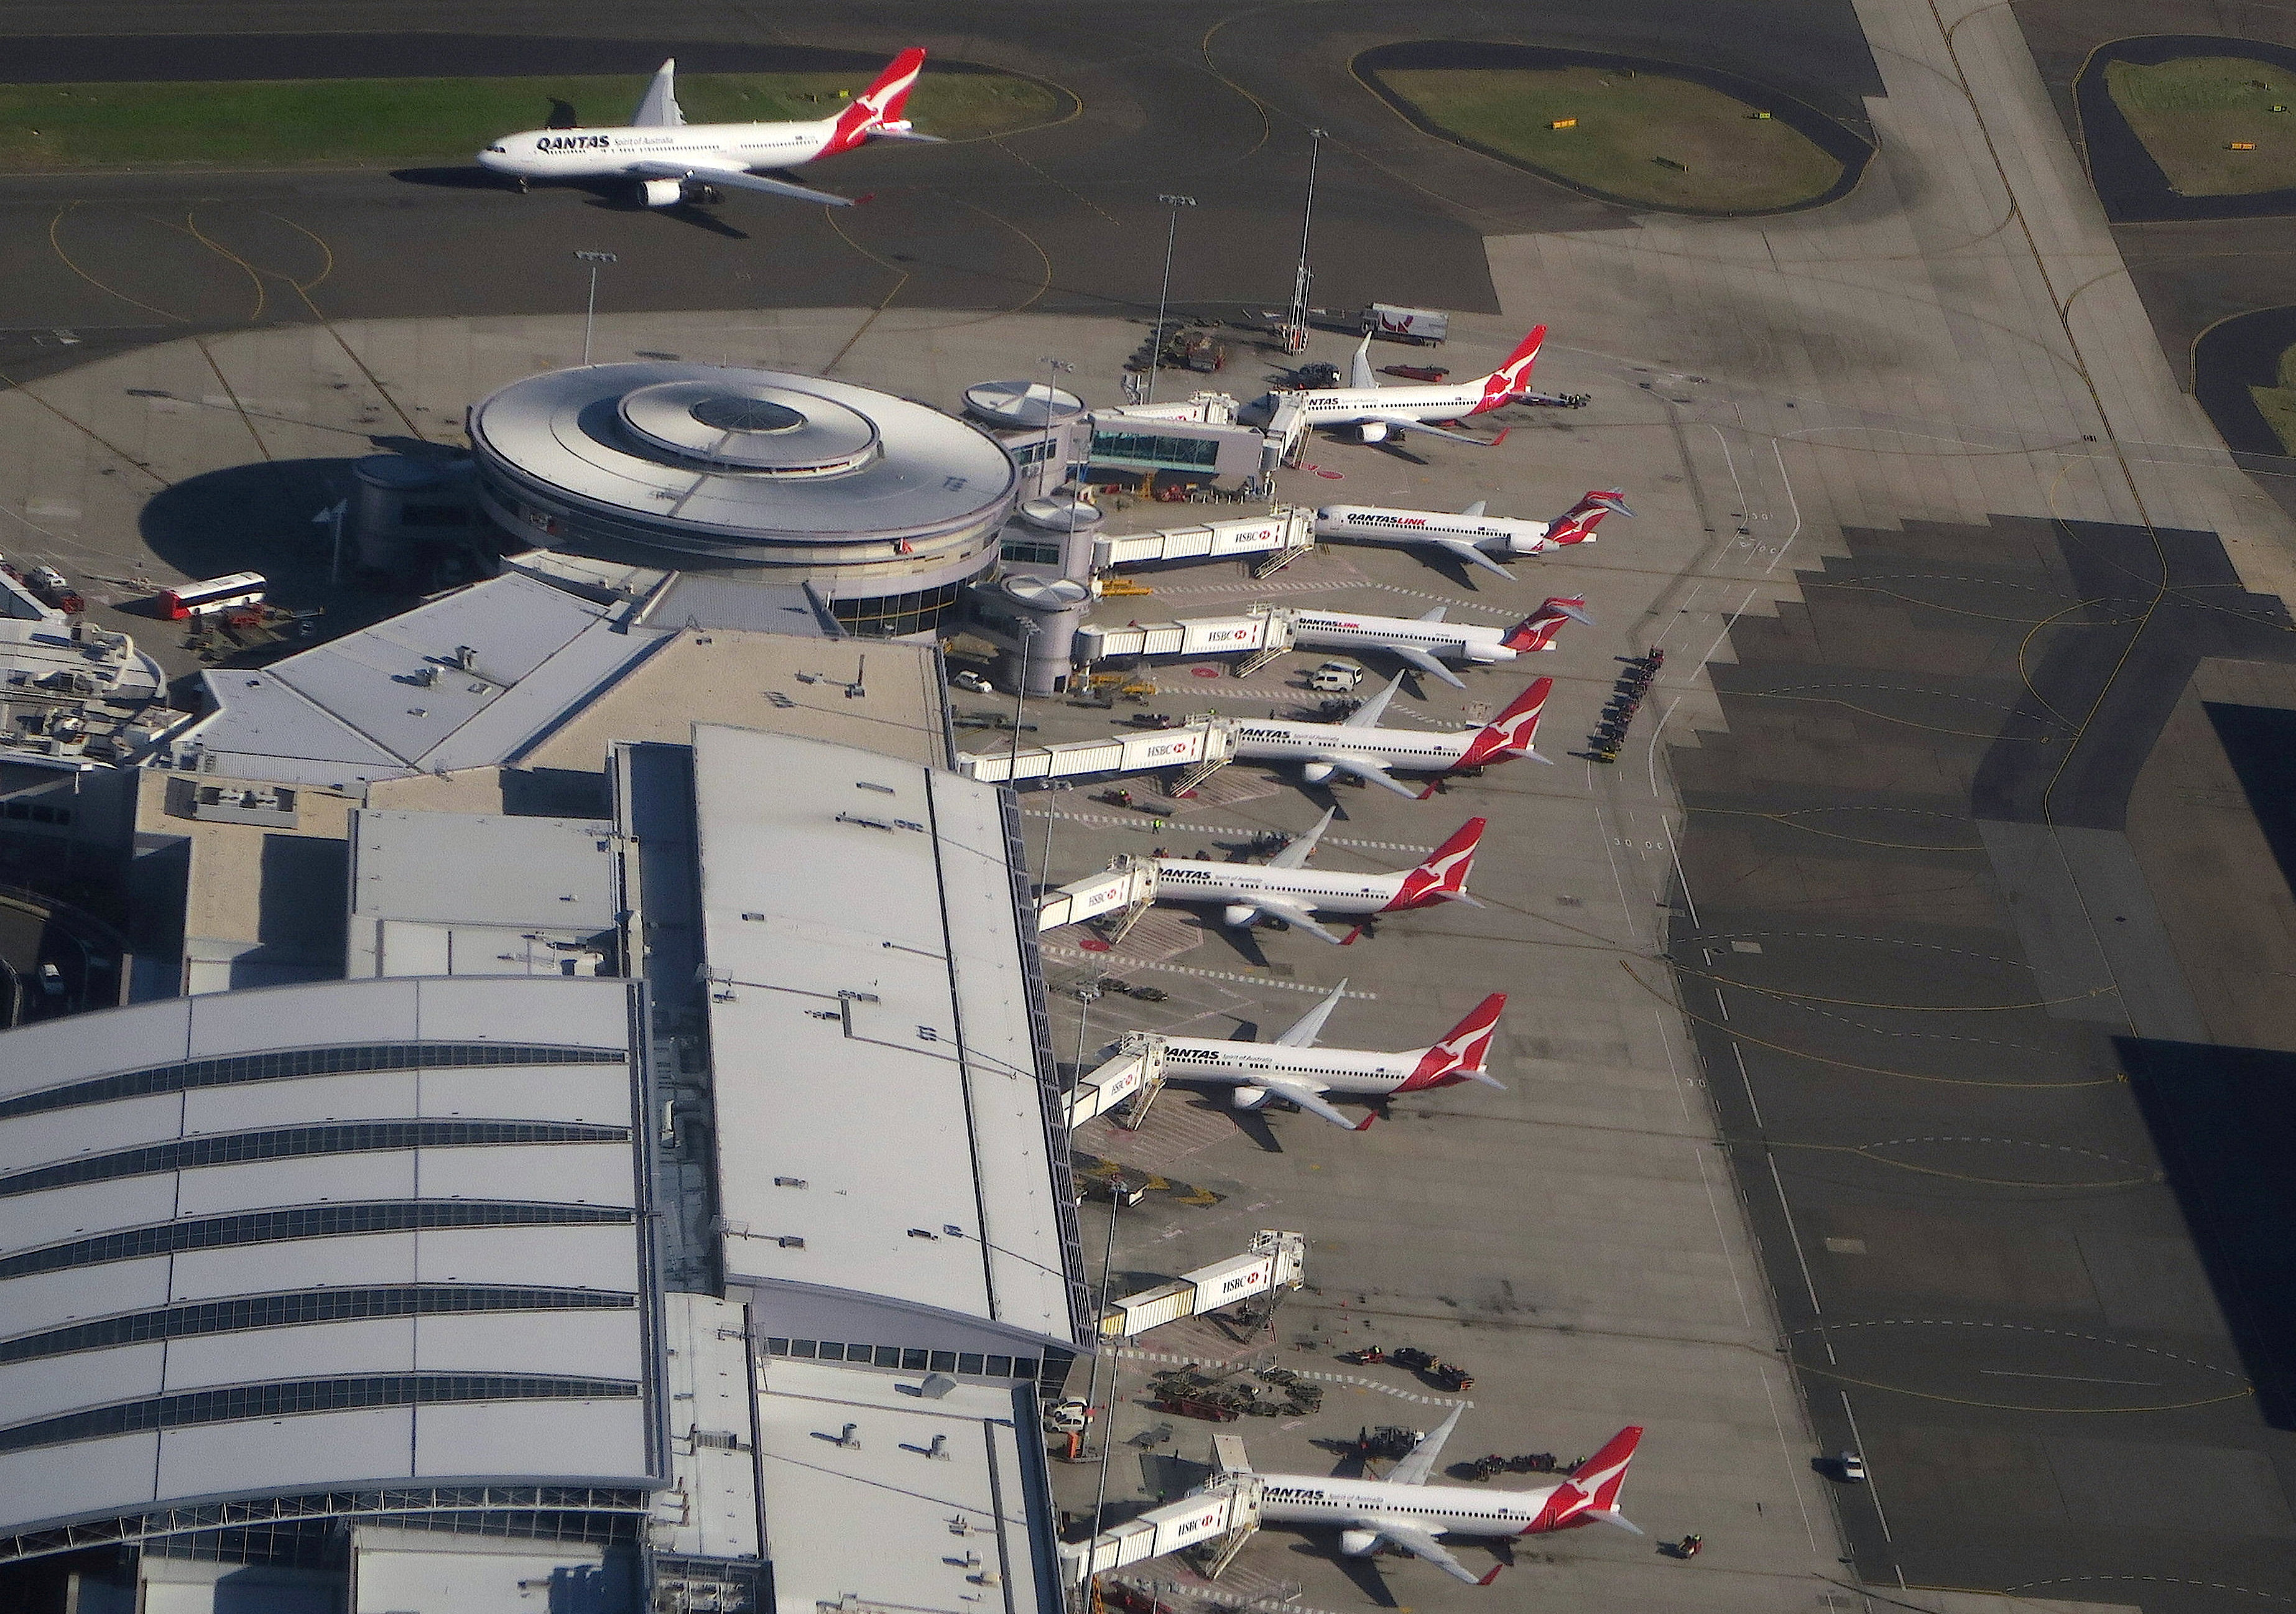 Qantas Airways planes are parked at the domestic terminal at Sydney airport in Australia